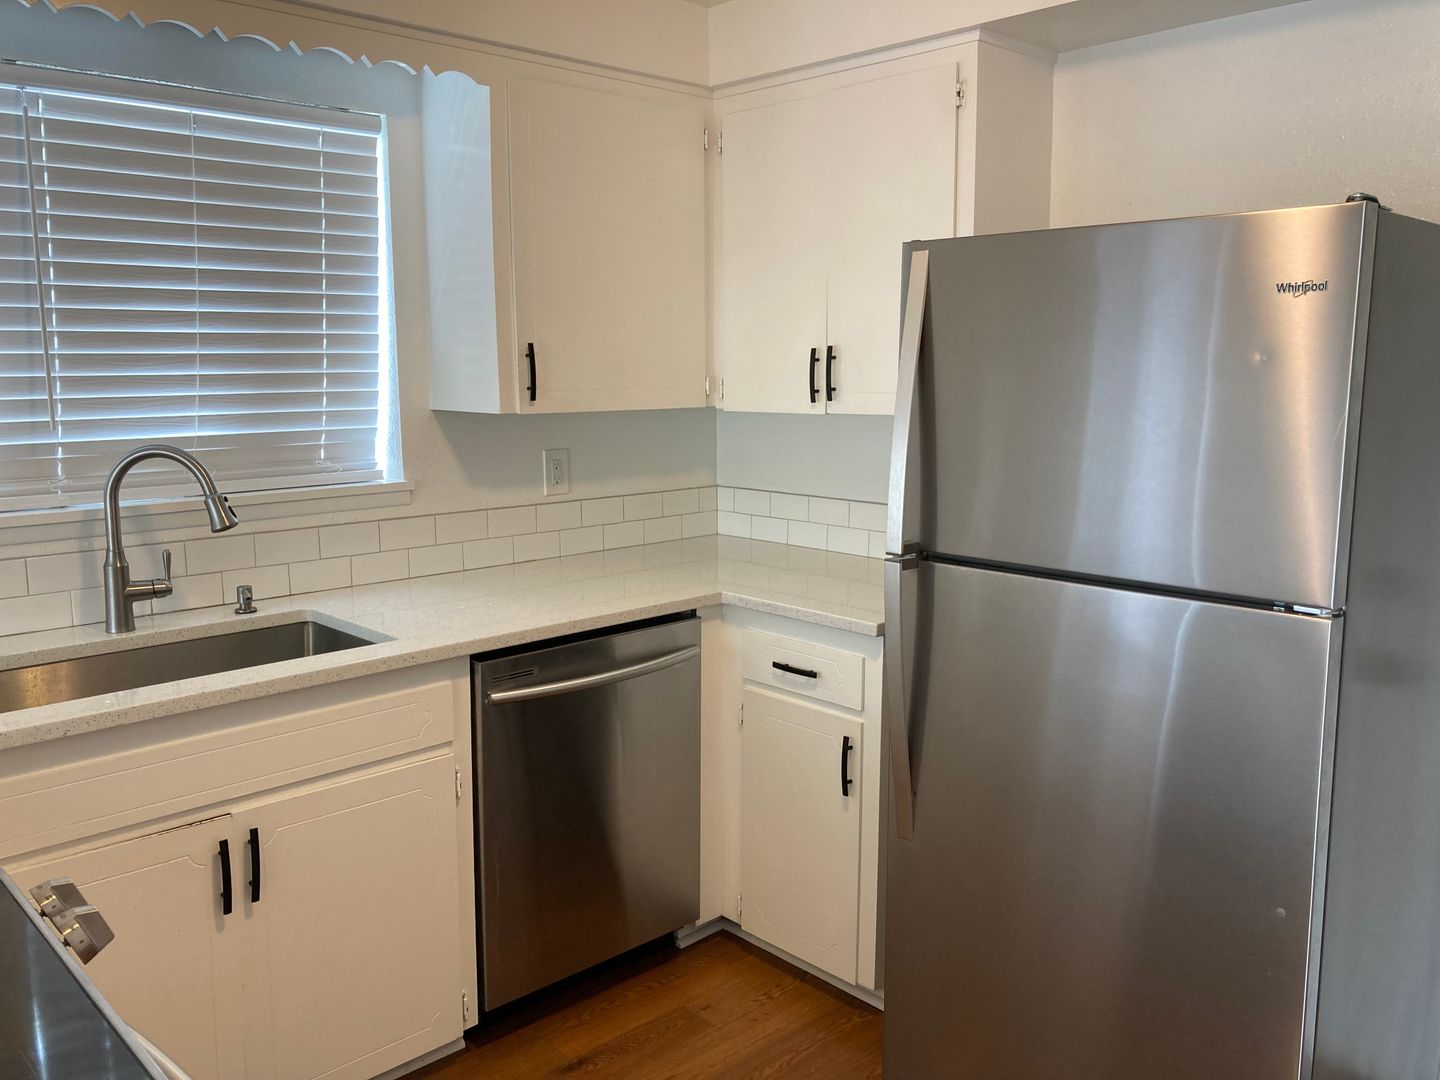 Recently Remodeled  2 Bedroom 1 Bath  Unit of a Duplex